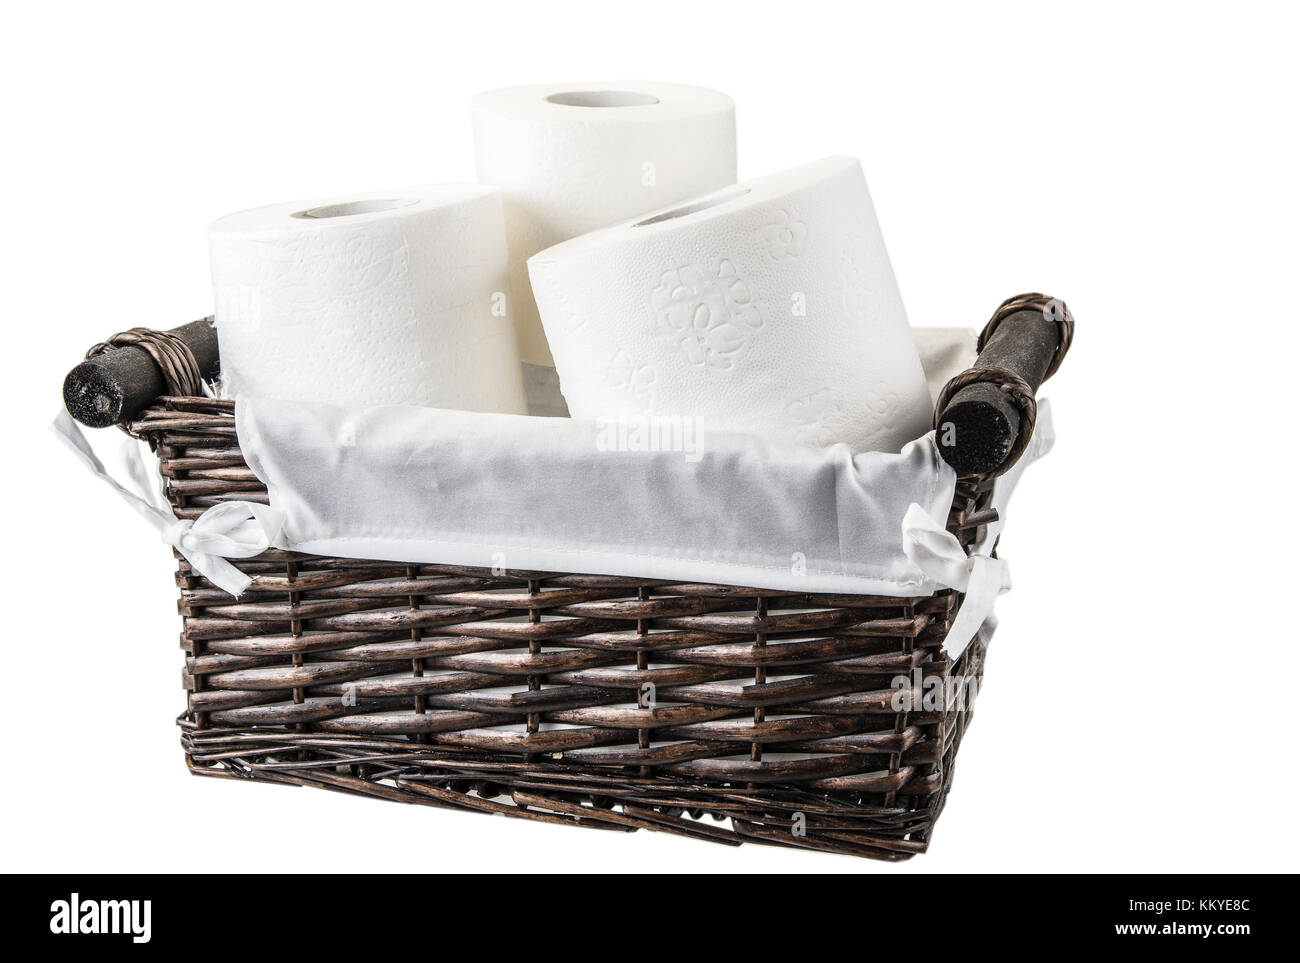 Basket full of toilet paper on the white background Stock Photo